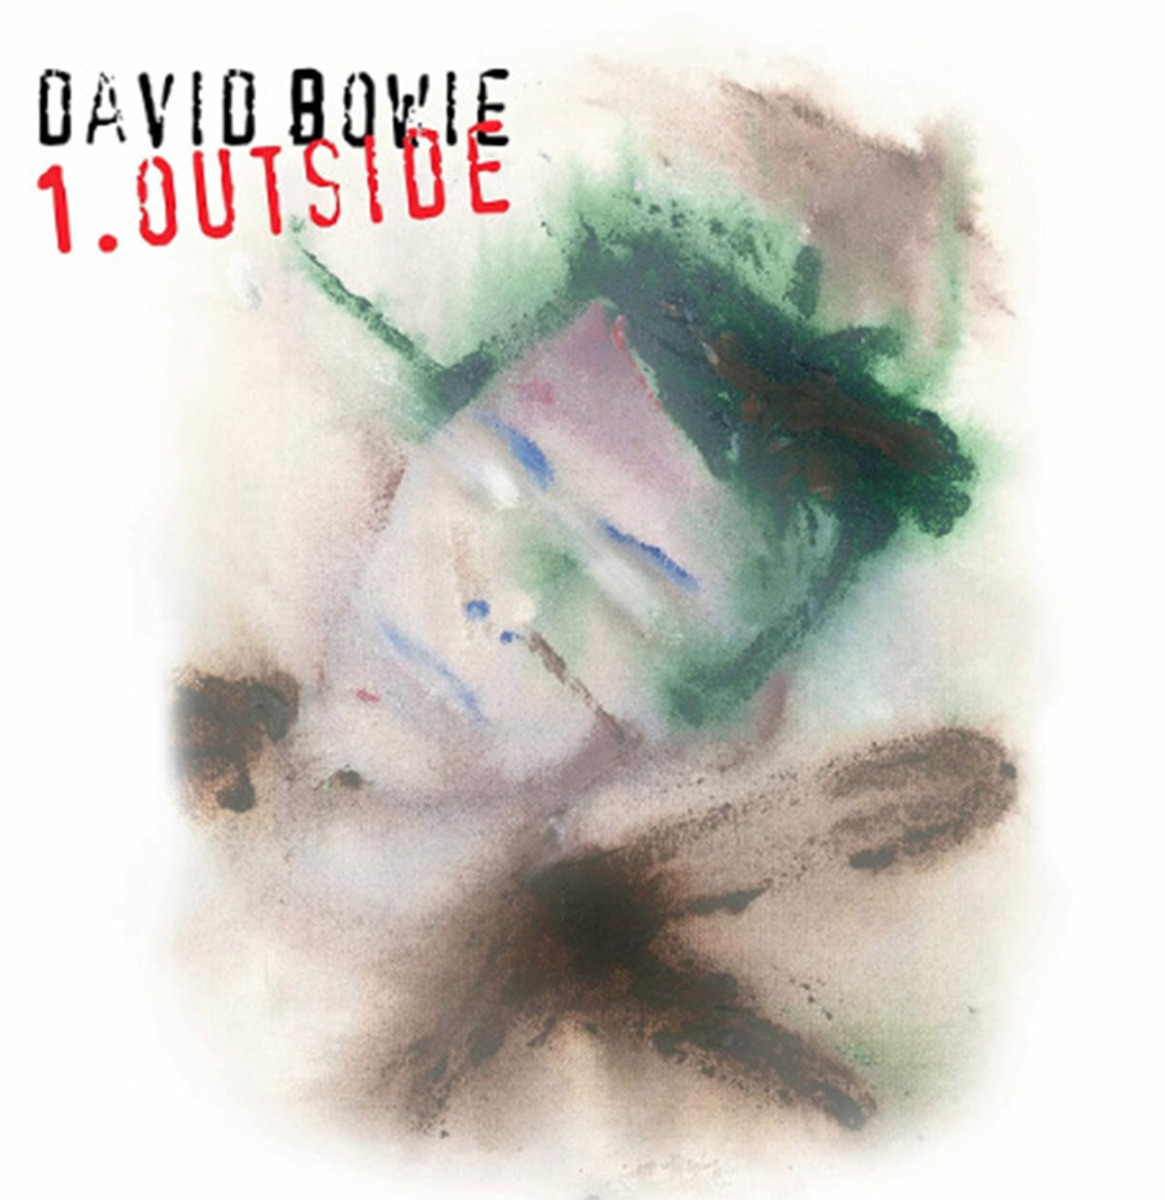 David Bowie - 1. Outside (The Nathan Adler Diaries: A Hyper Cycle) 2LP